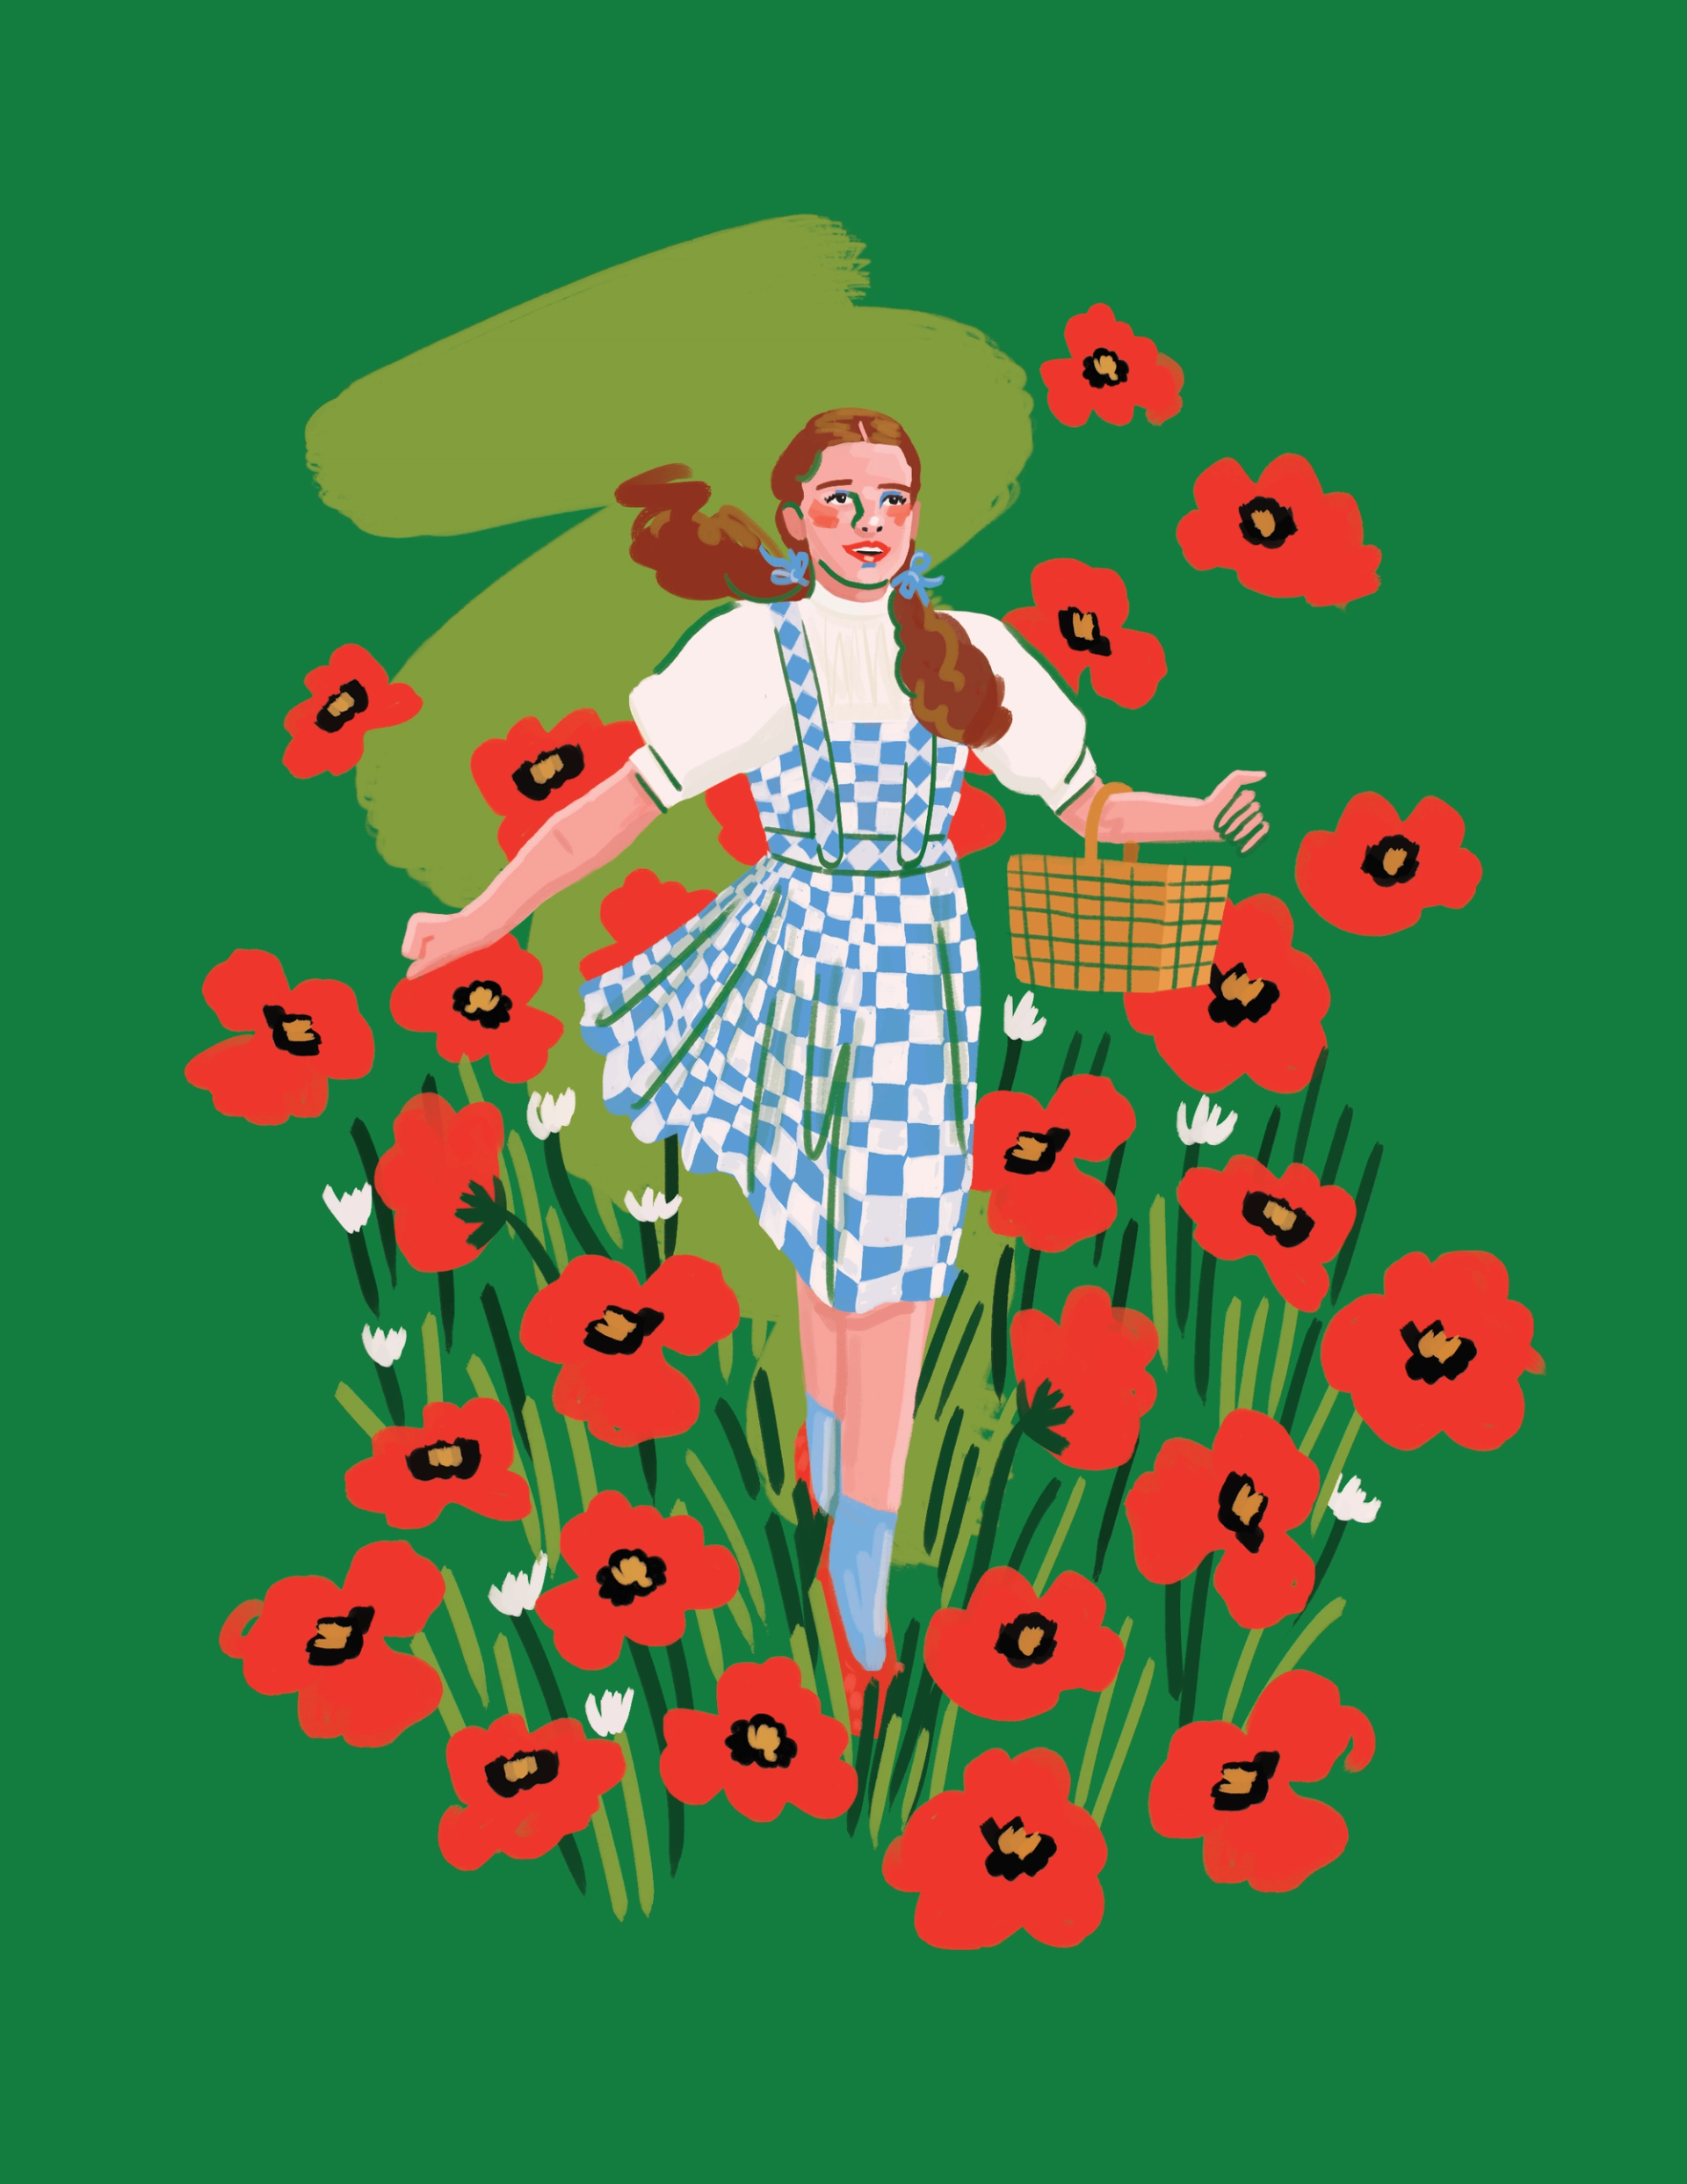 Niege Borges illustrated 'Wizard of Oz' for Warner Bros. 100 anniversary celebrations